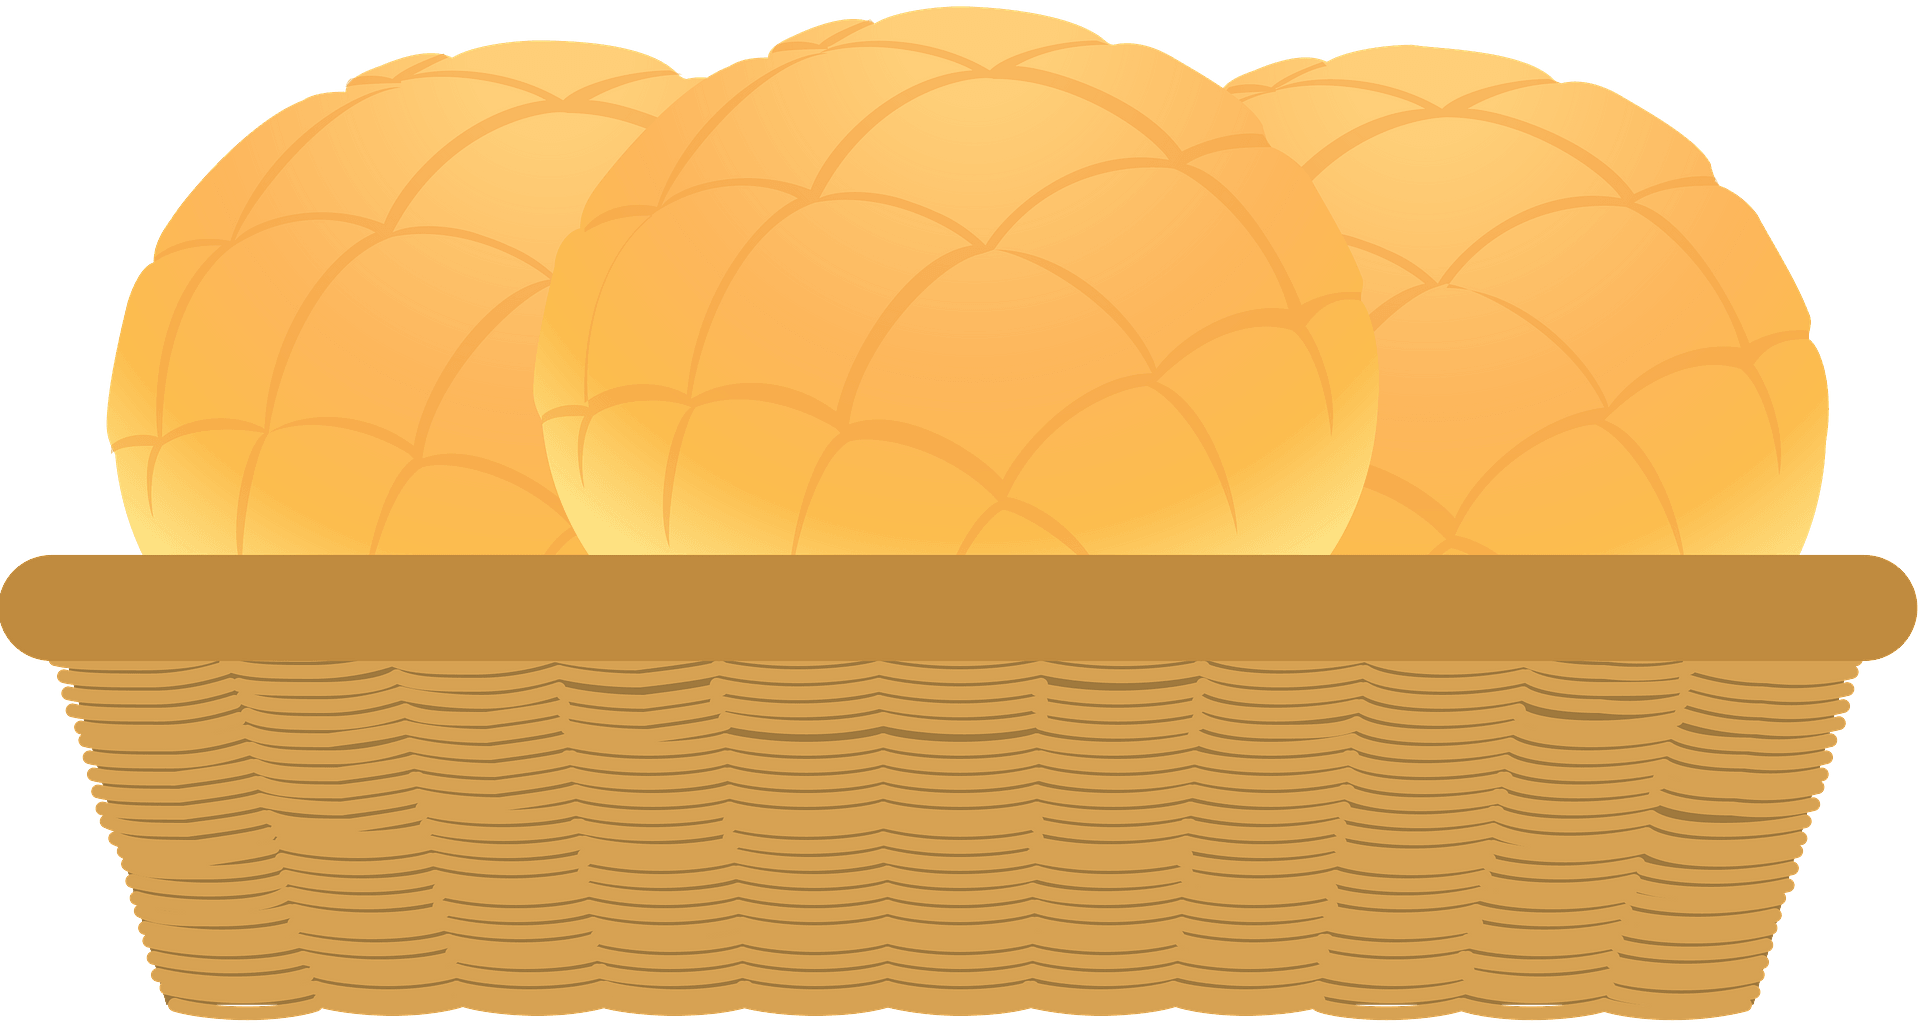 Basket Wicker Slices Wheat Bread PNG Image